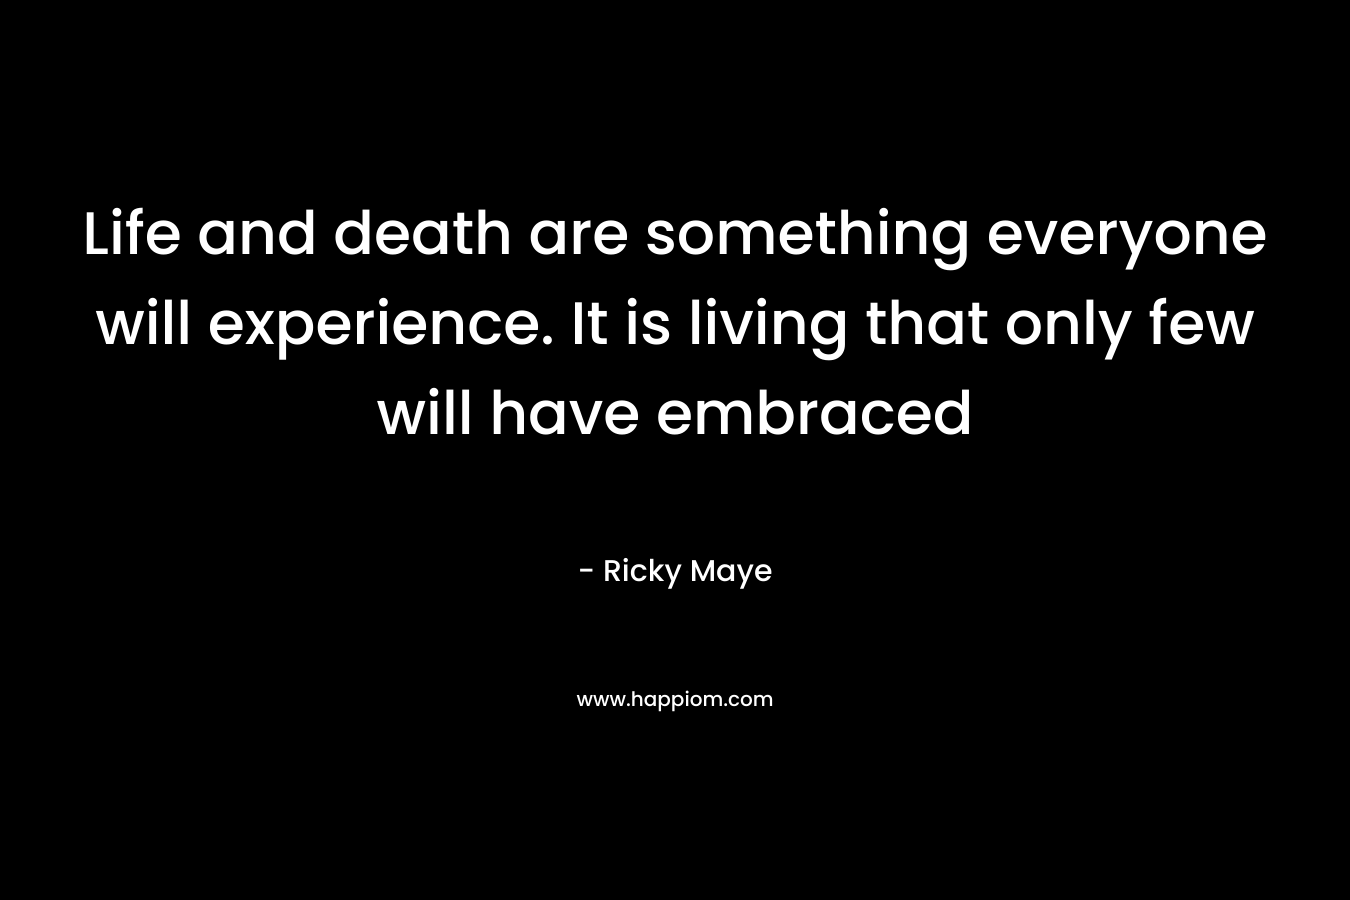 Life and death are something everyone will experience. It is living that only few will have embraced